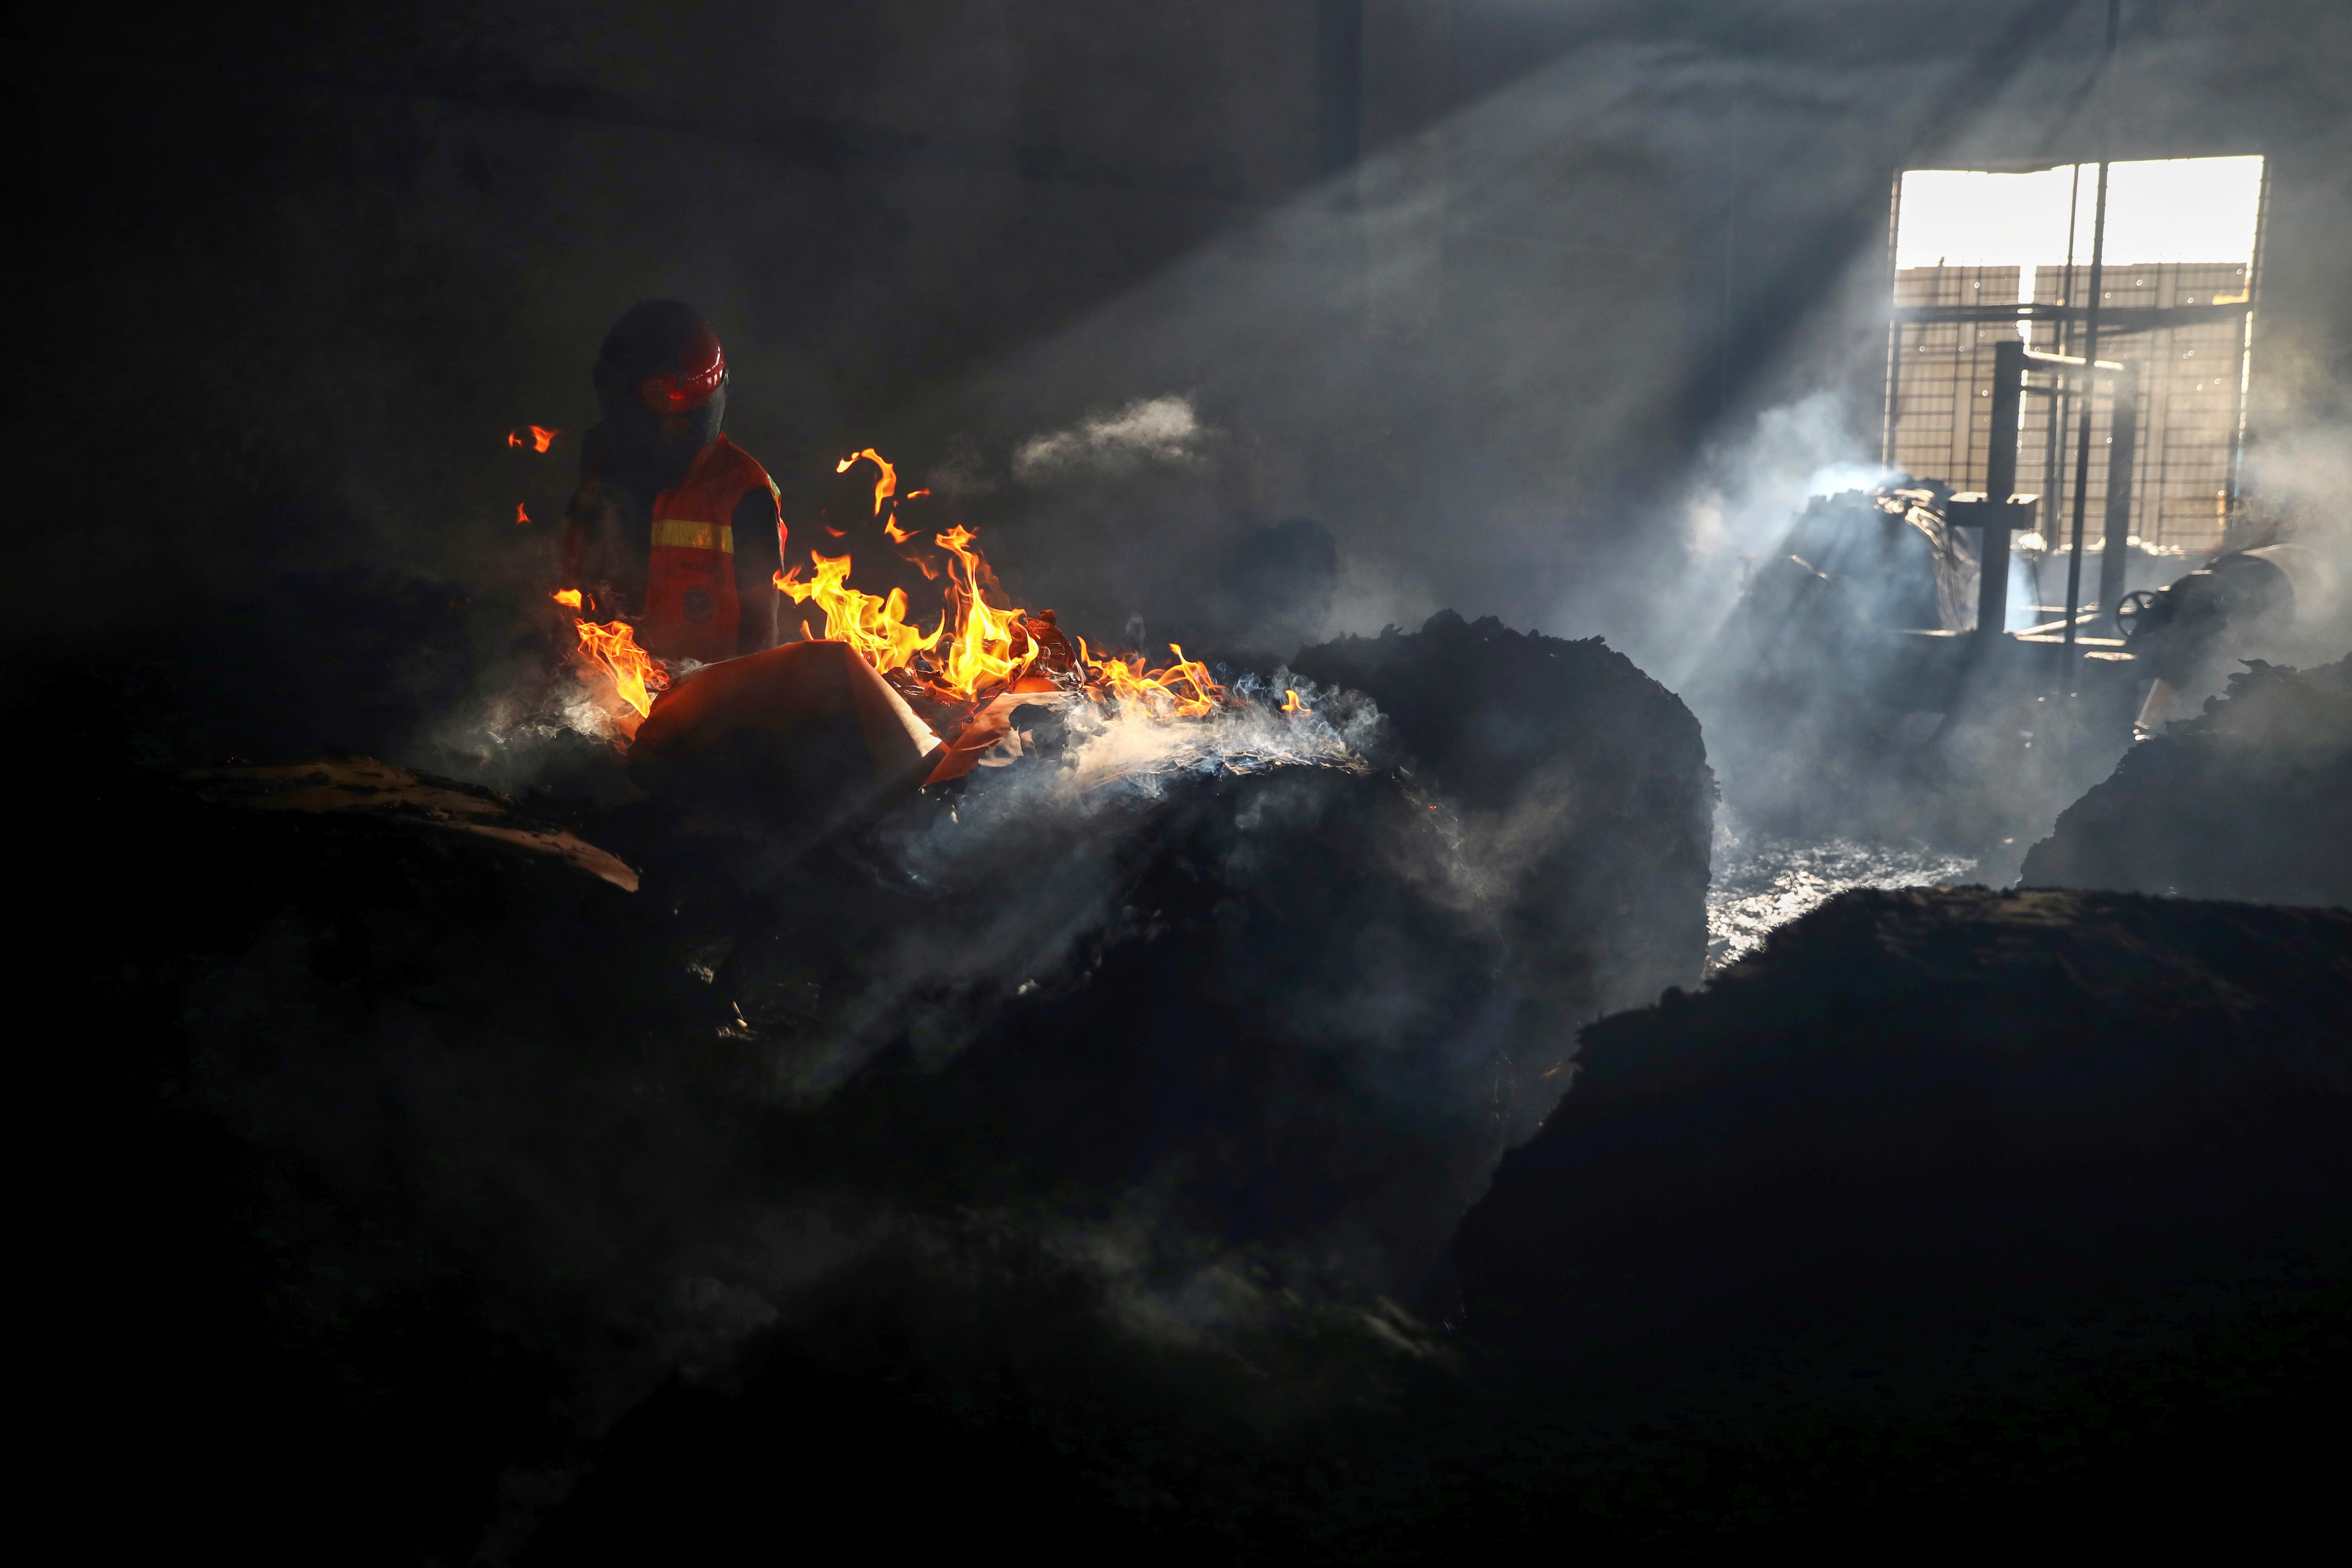 A firefighter tries to extinguish fire inside the building after a fire broke out at a factory named Hashem Foods Ltd. in Rupganj of Narayanganj district, on the outskirts of Dhaka, Bangladesh, July 9, 2021. REUTERS/Mohammad Ponir Hossain